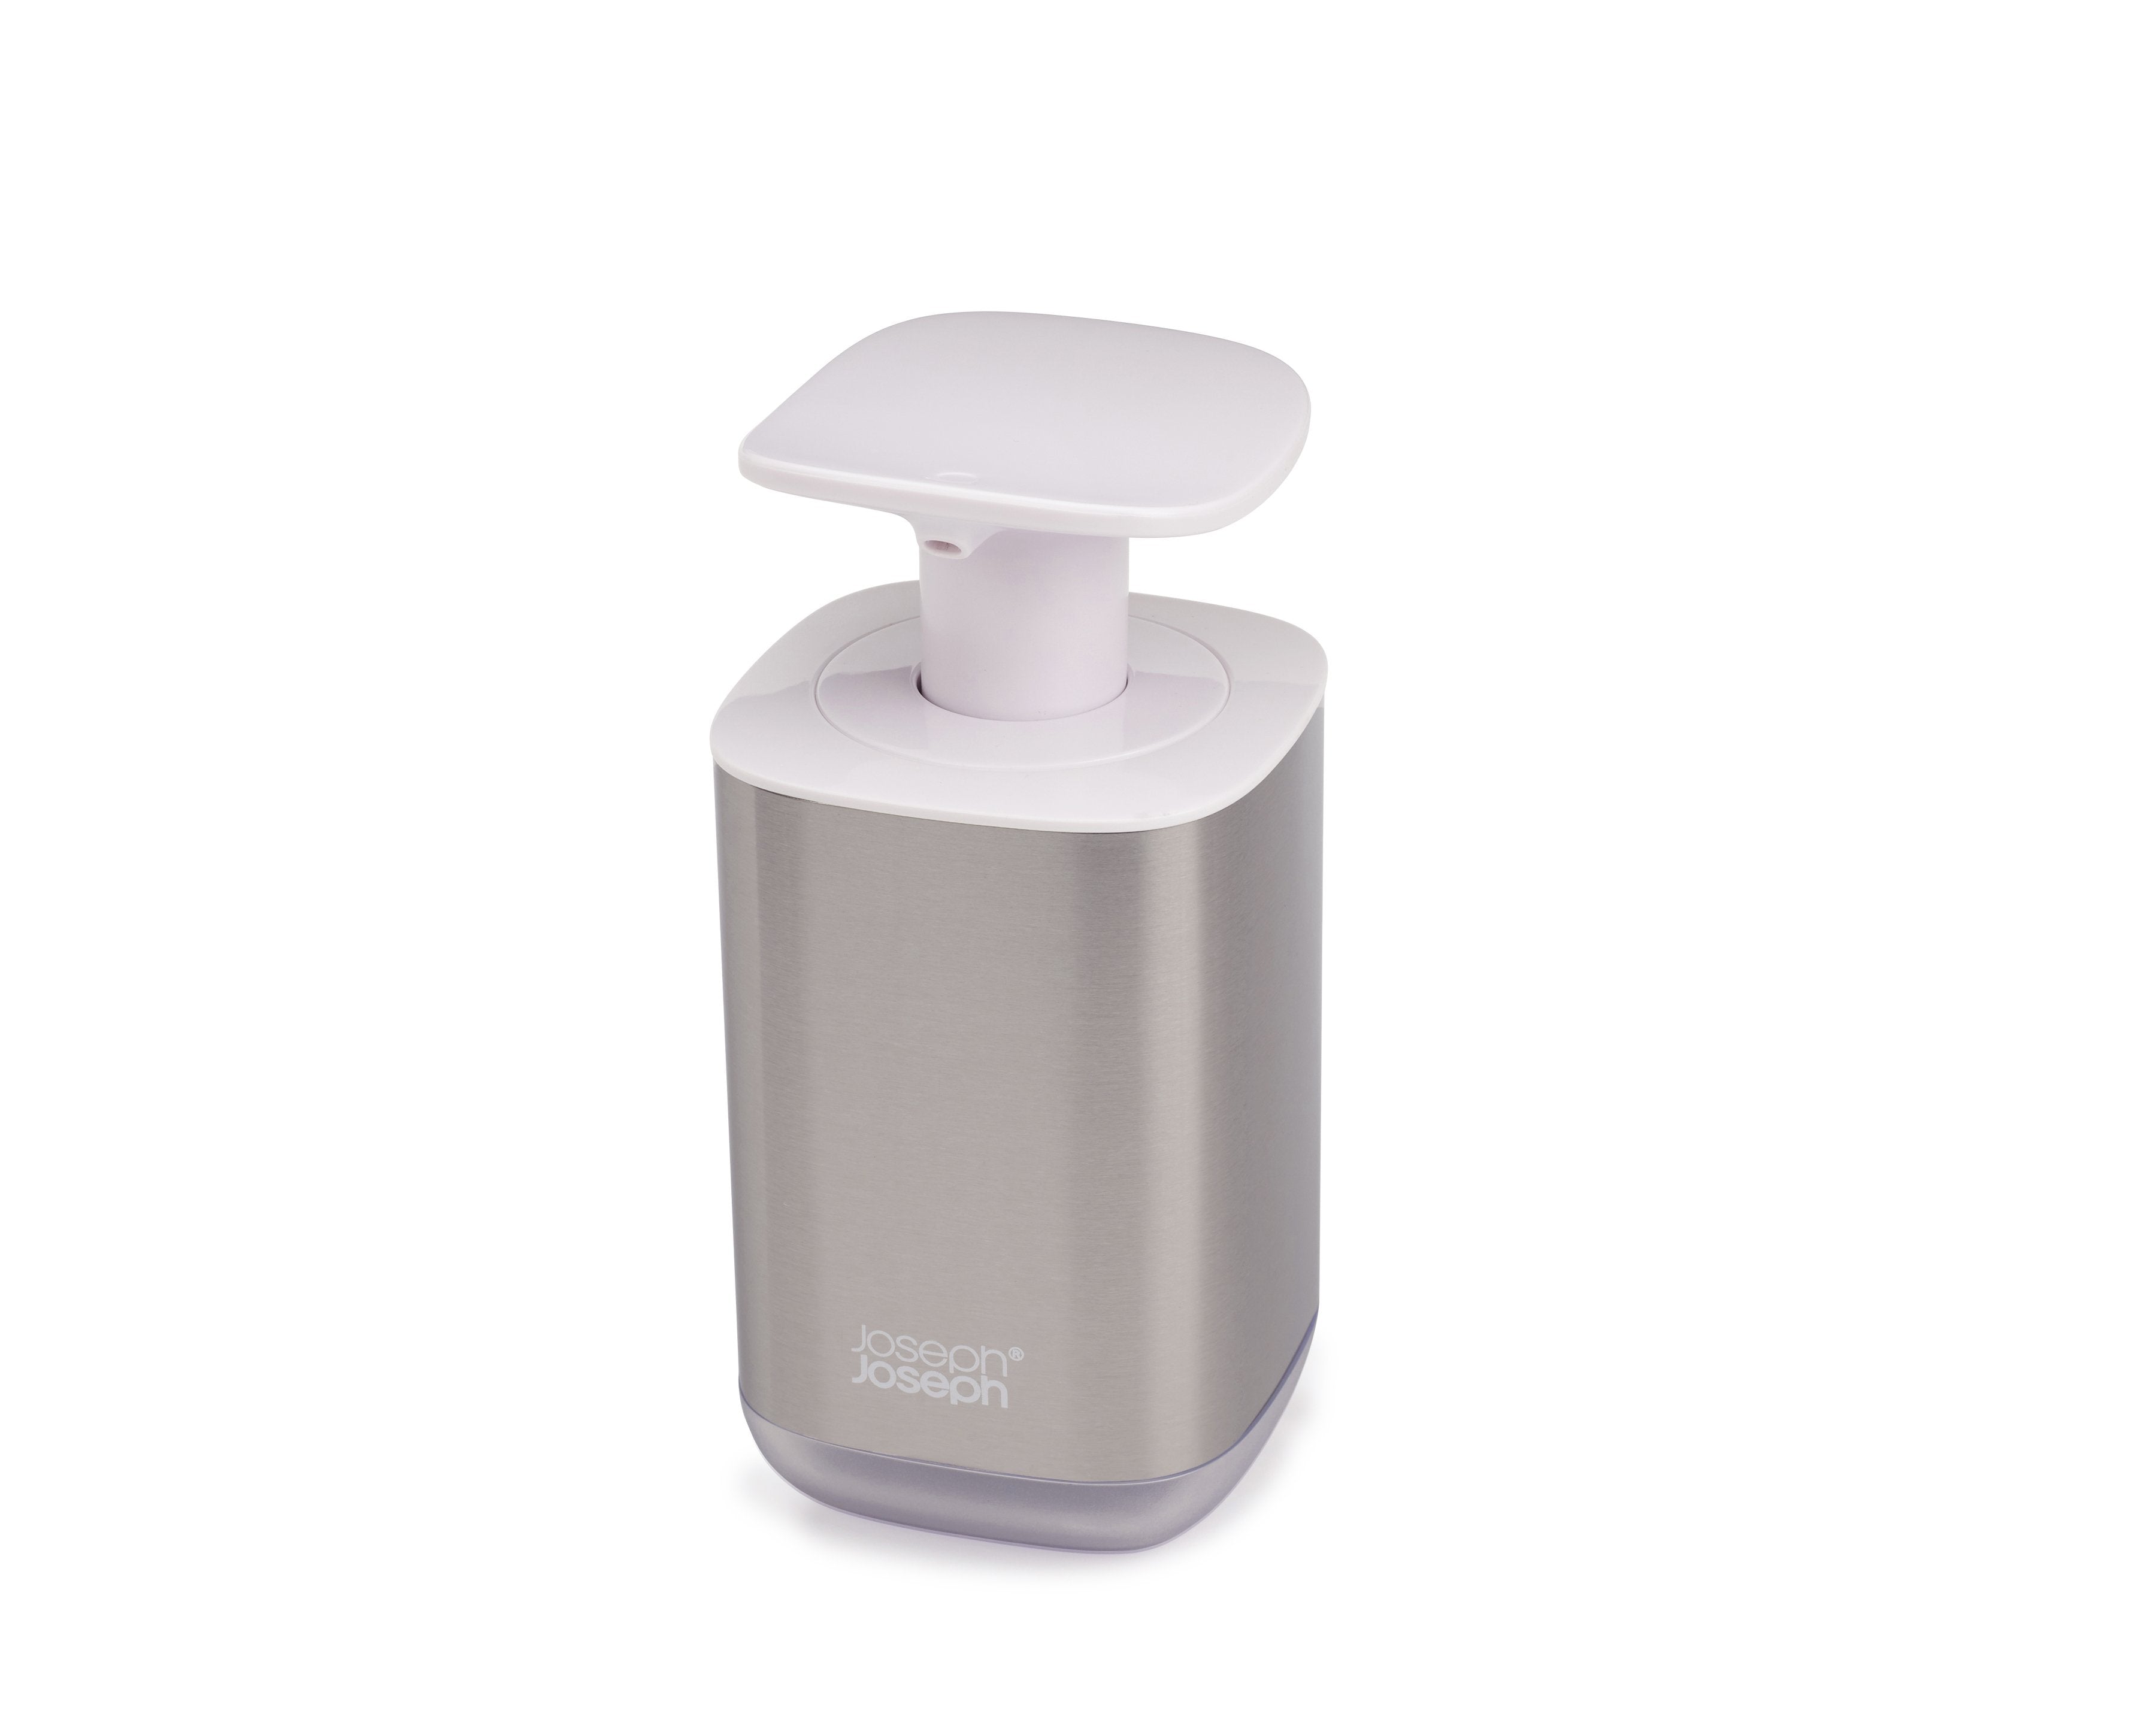 BEON.COM.AU  This clever soap dispenser can easily be operated with your wrist or forearm when your hands are messy.  Large easy-push pump head Push with wrist for optimum hygiene Transparent window for checking fill level Non-slip base Suitable for all types of liquid hand soap  Specifications Care & us... Joseph Joseph at BEON.COM.AU